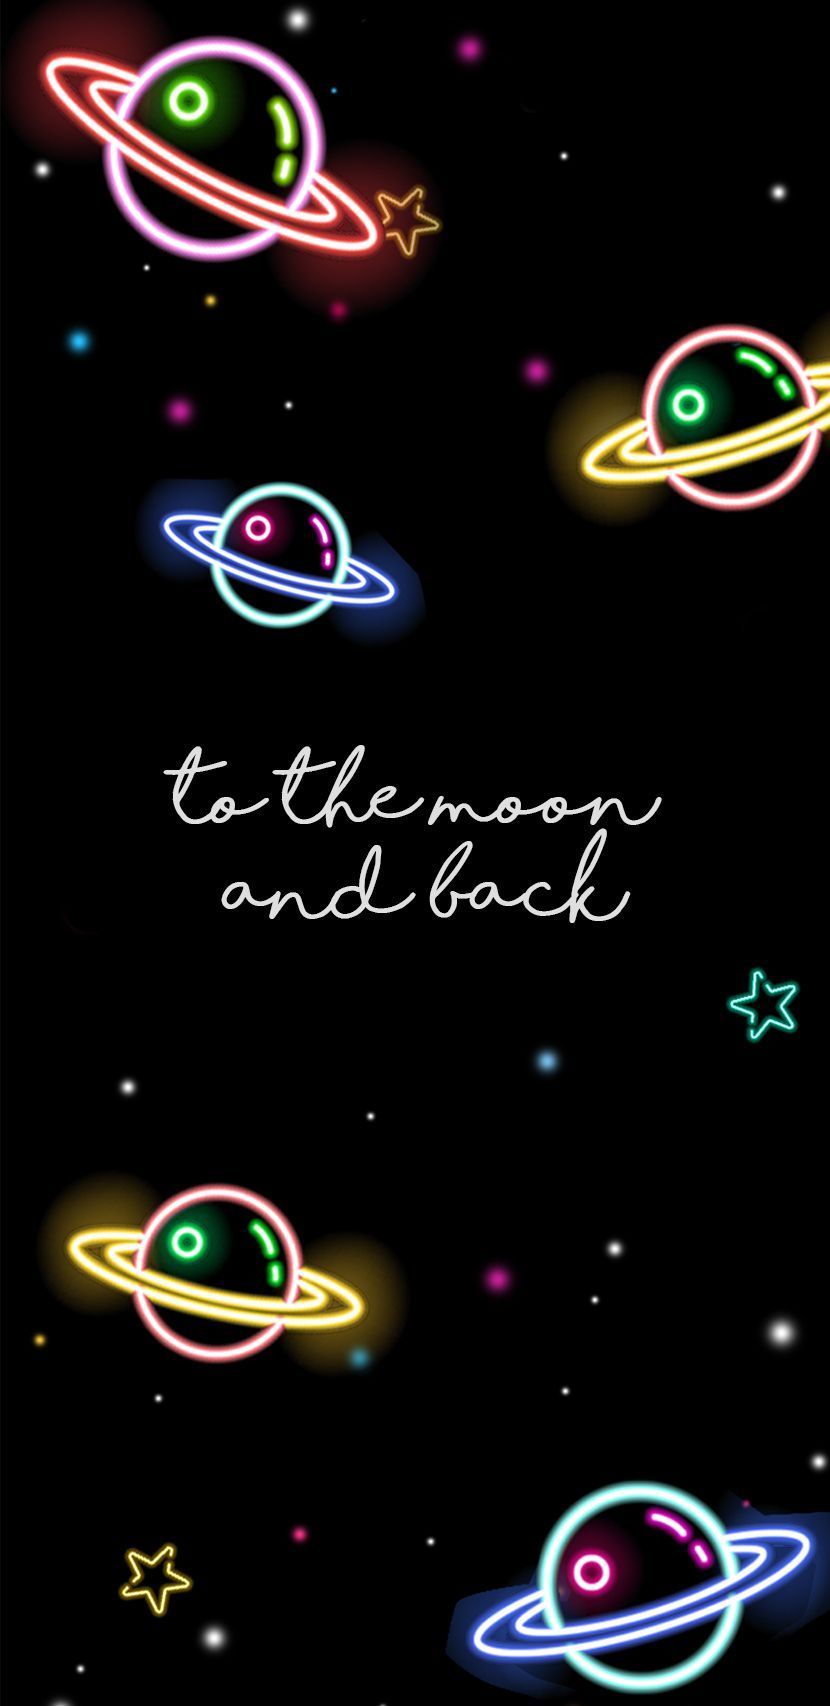 To the moon and back / neon - Neon